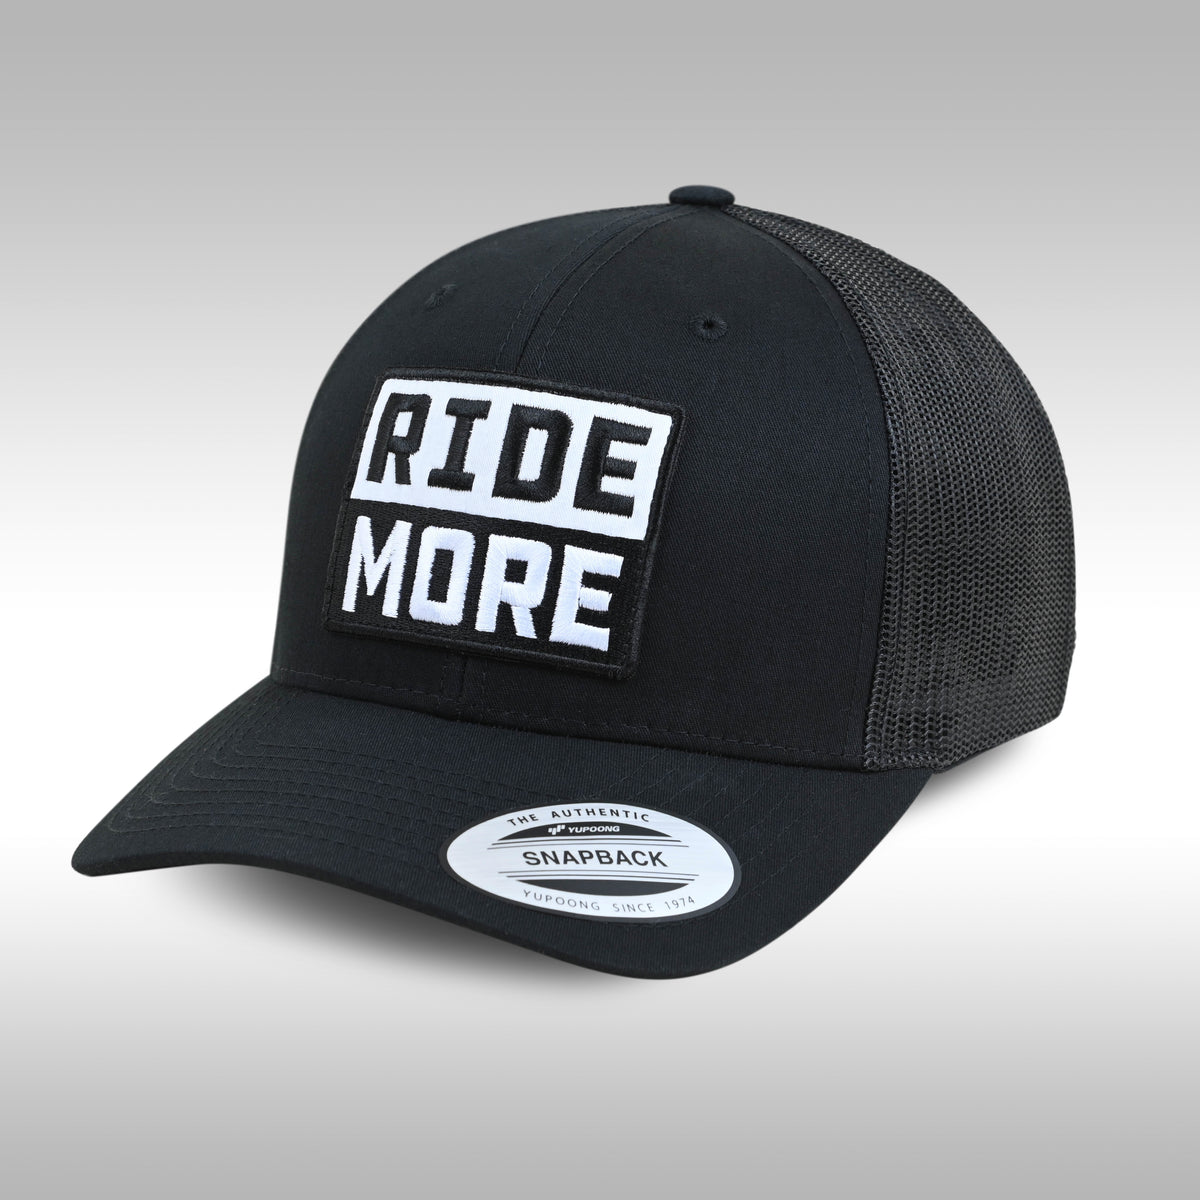 RIDE MORE HATS